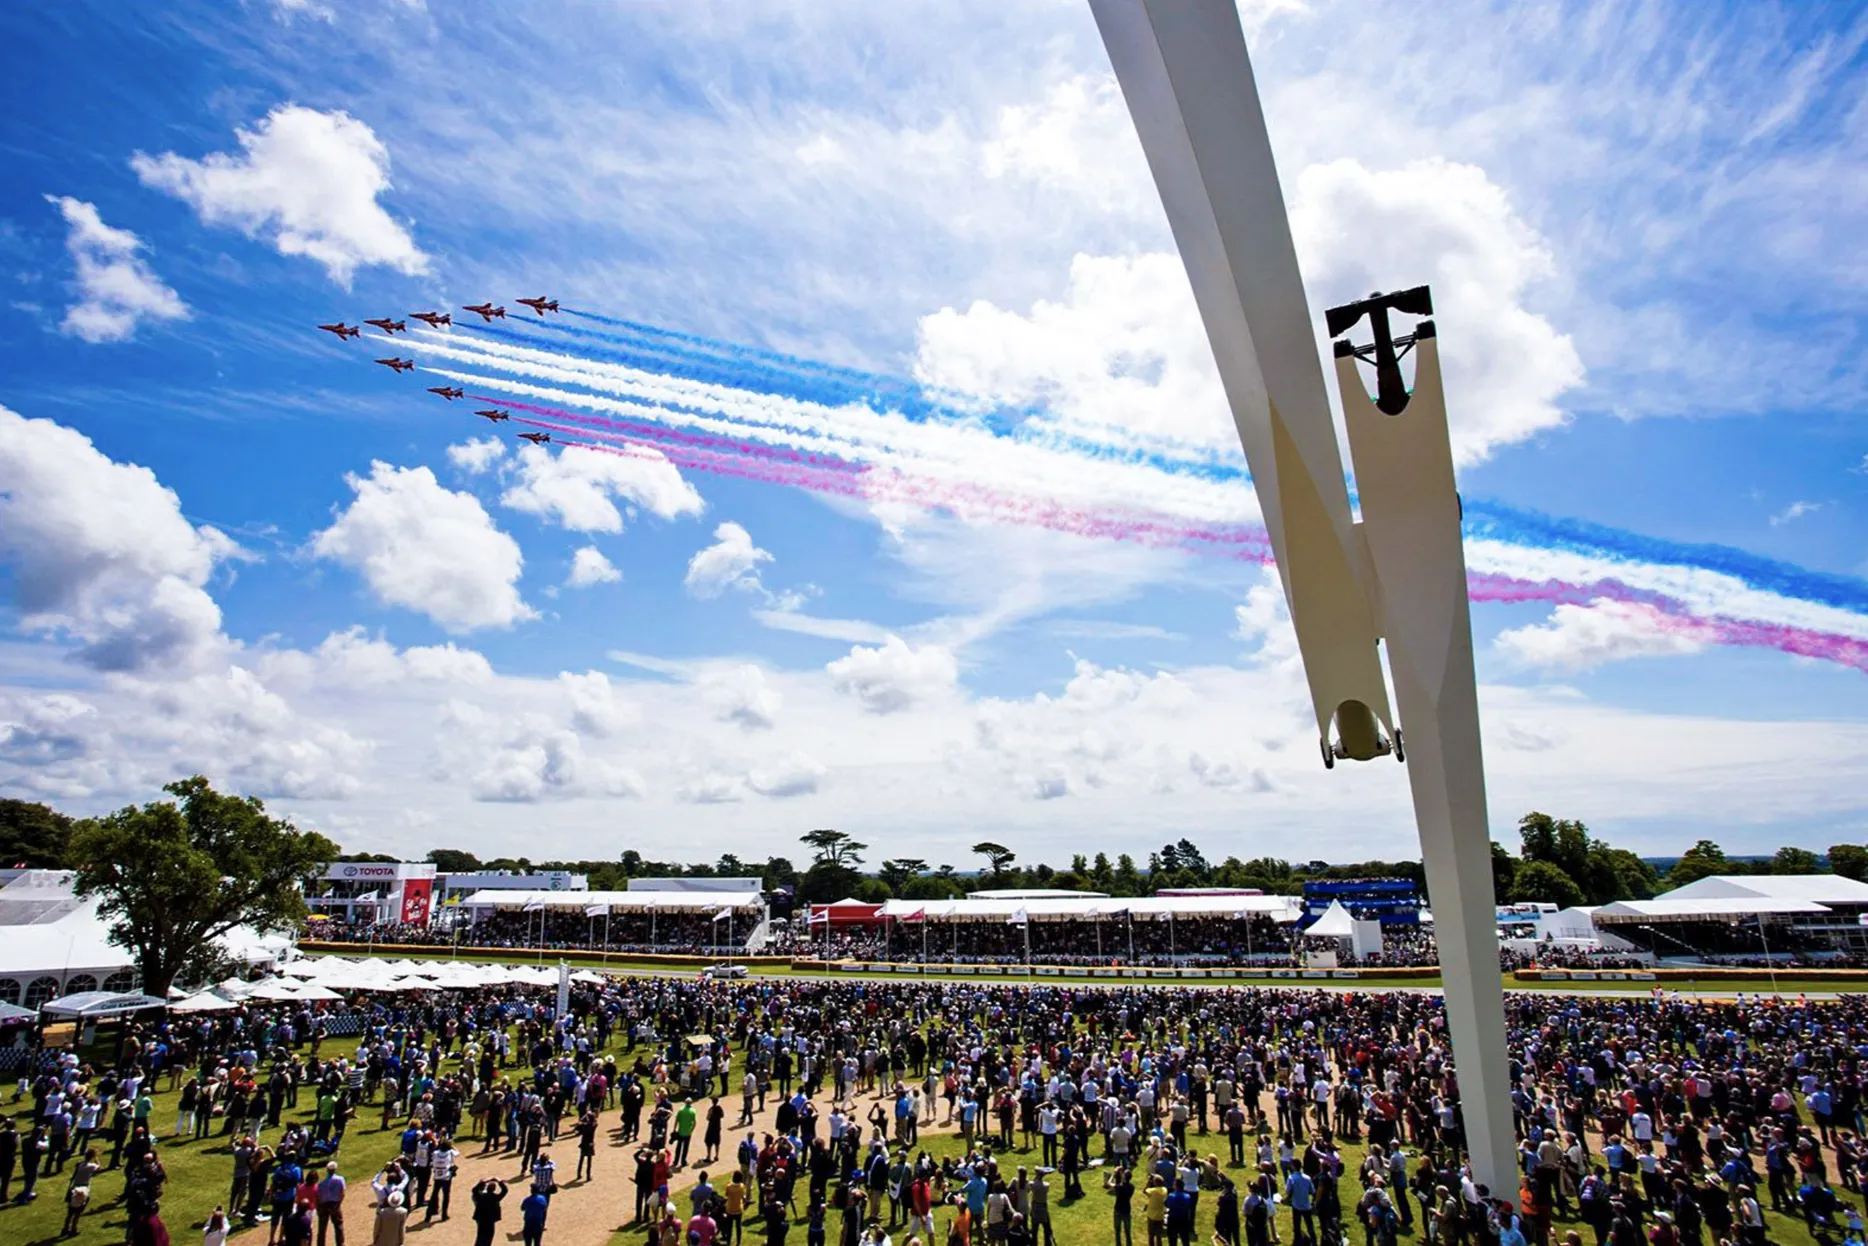 Aerial Display at the Goodwood Festival of Speed